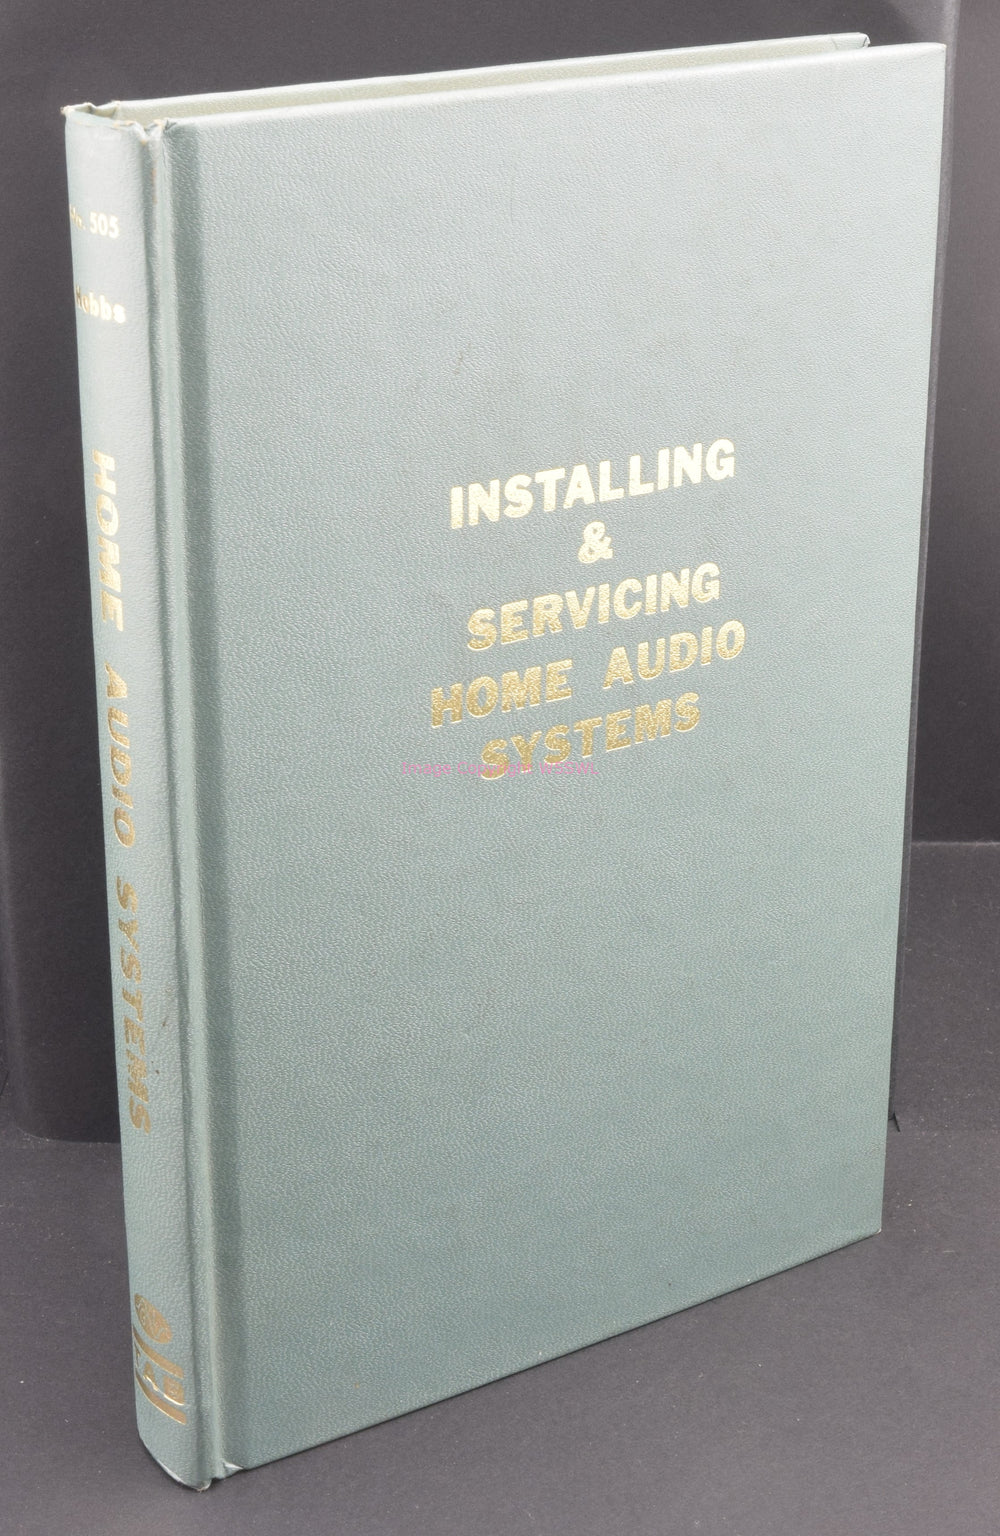 Installing & Servicing Home Audio Systems Hobbs Tab Books - Dave's Hobby Shop by W5SWL